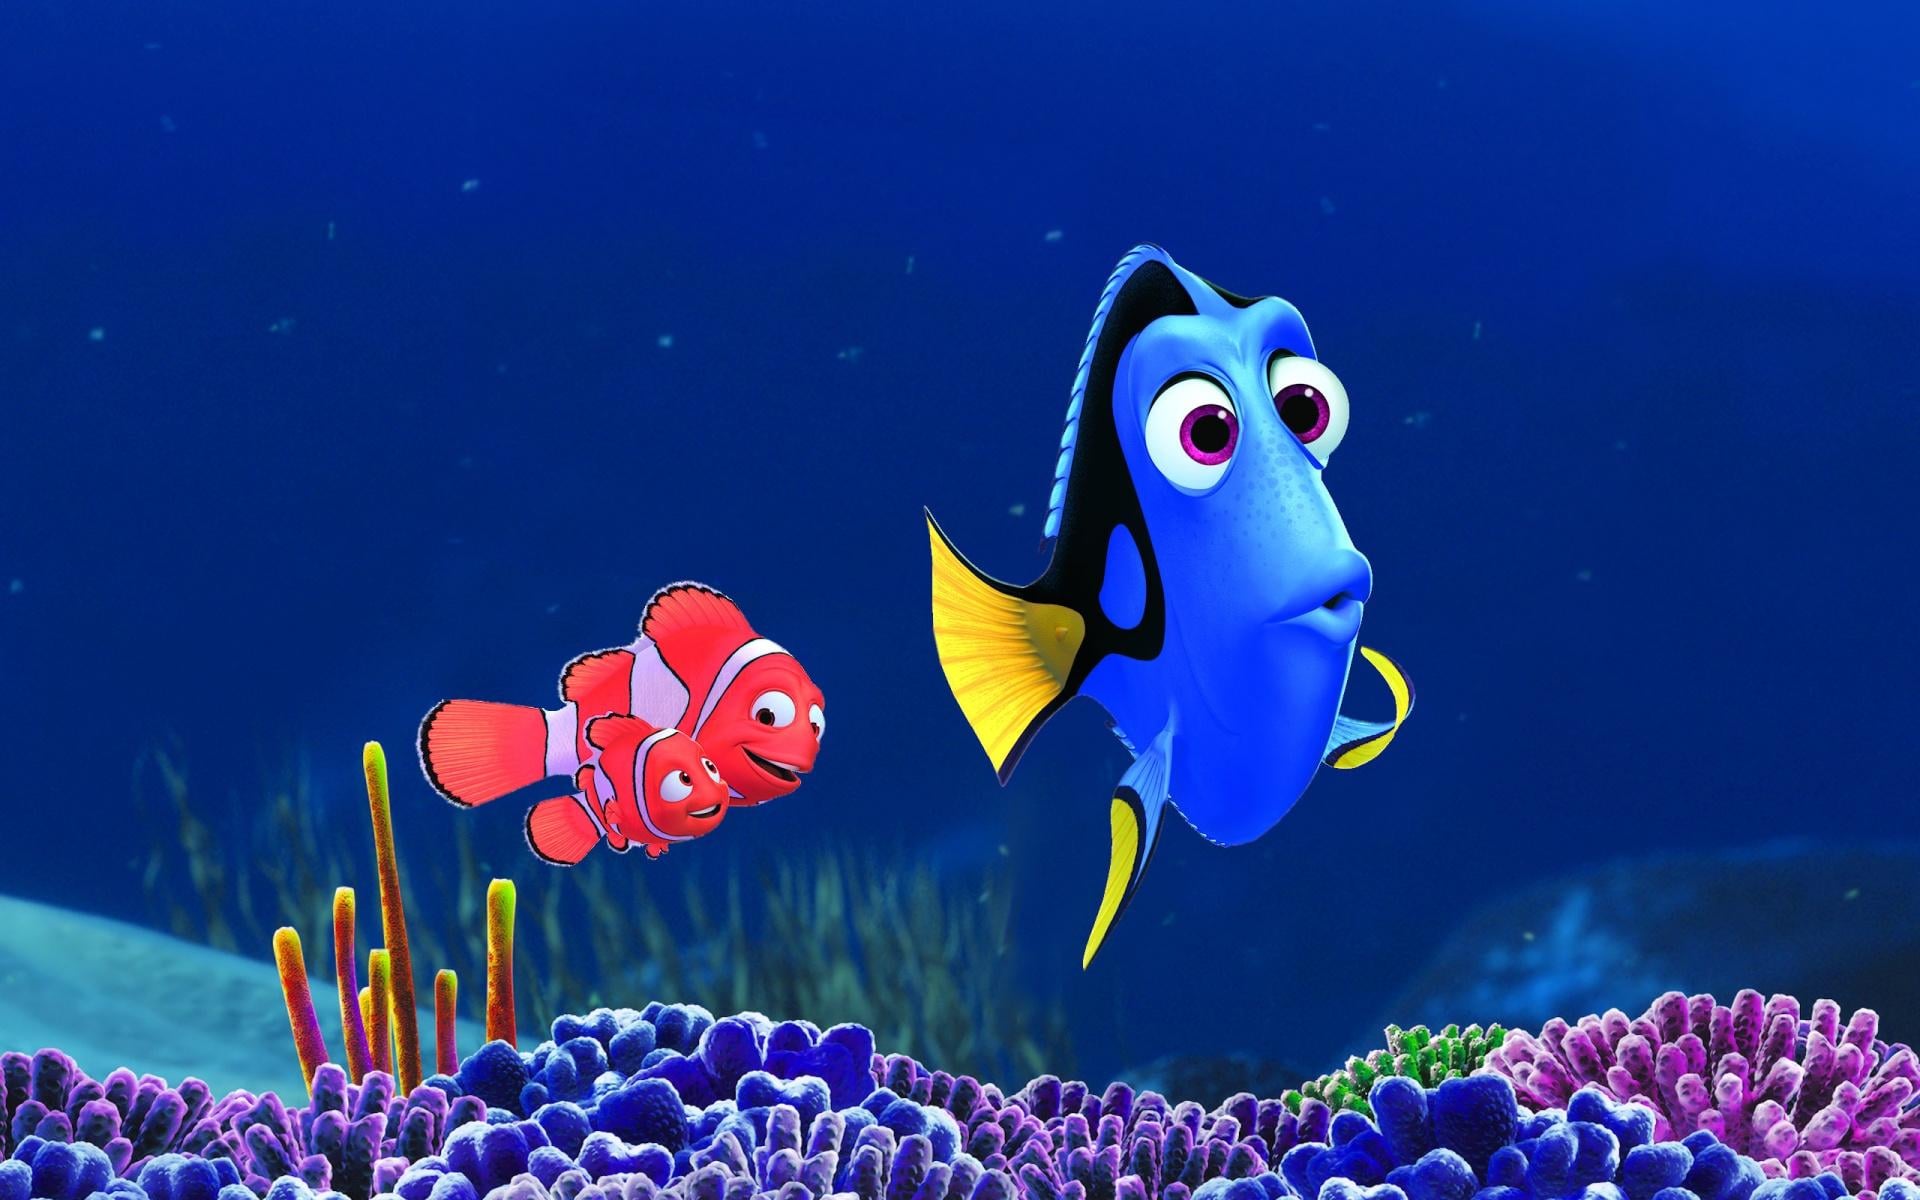 Why Are Finding Nemo and Finding Dory Such Enormous Hits?